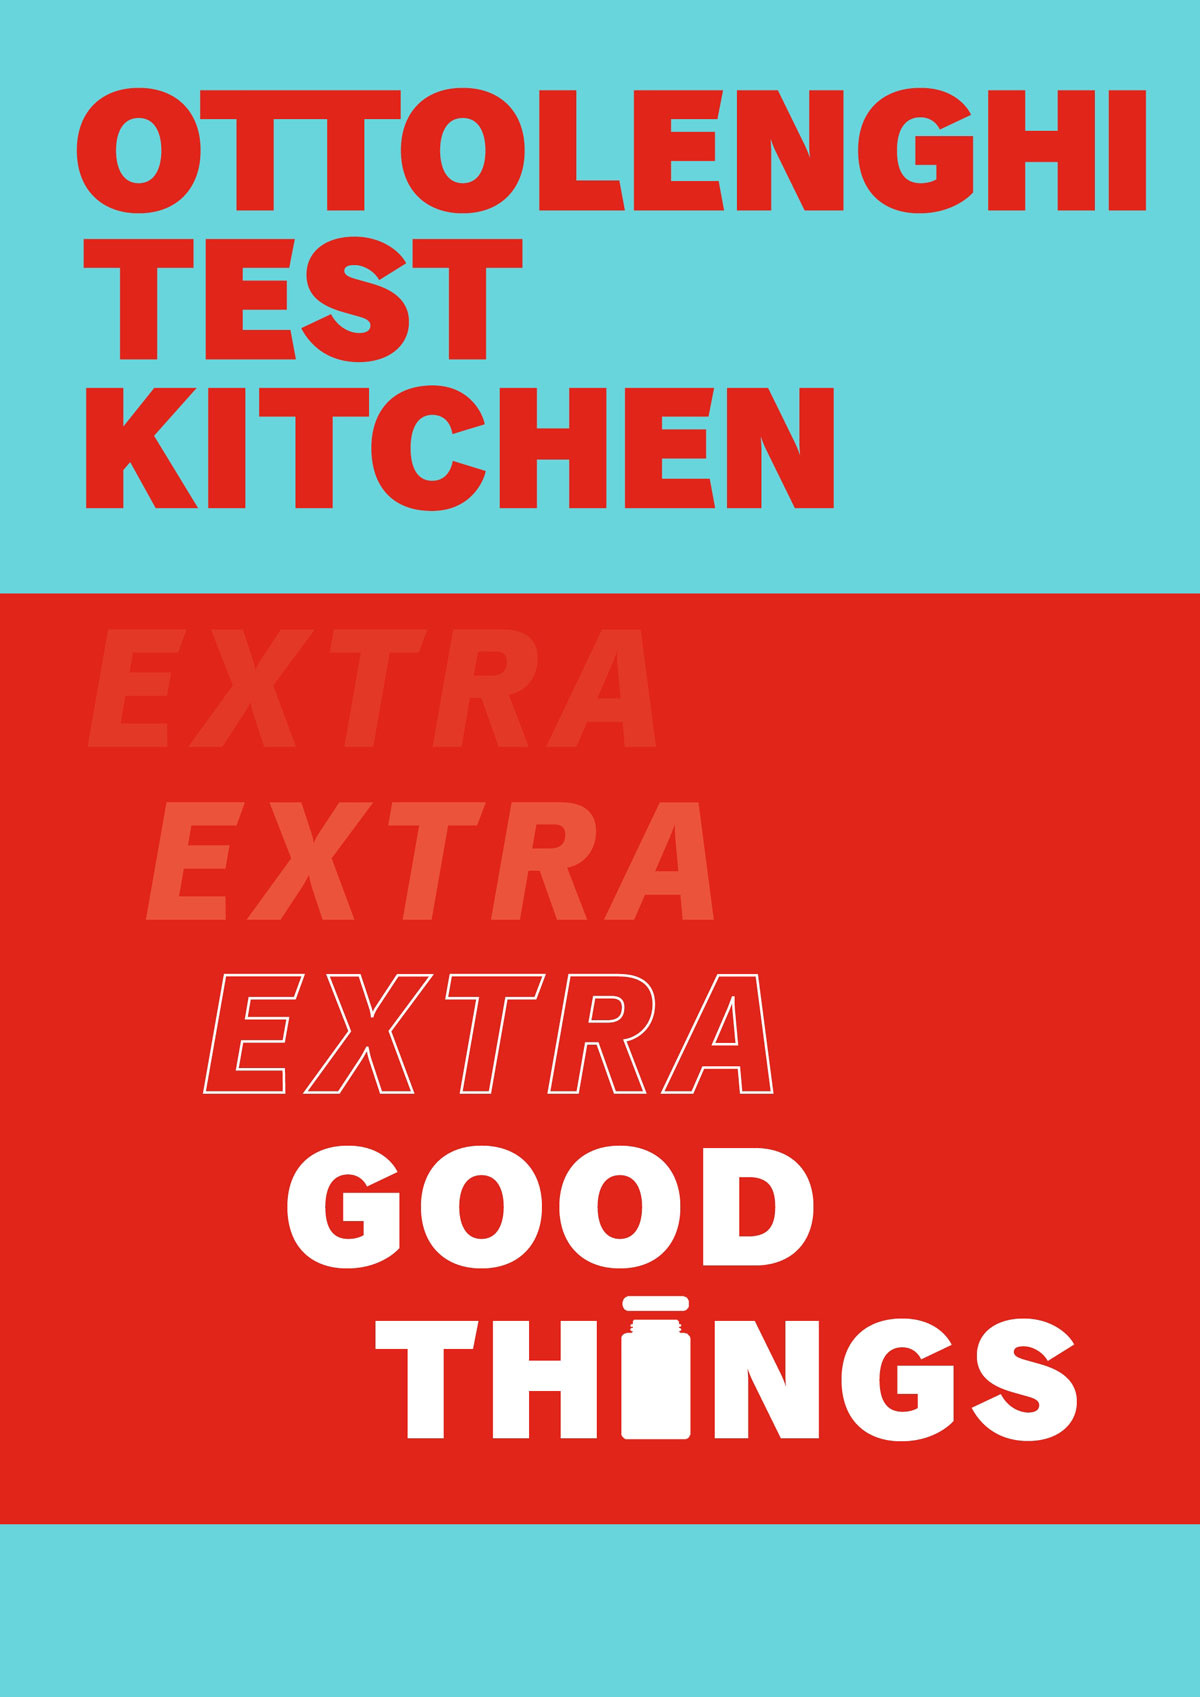 Book cover of OTK Extra Good Things by Noor Murad and Yotam Ottolenghi